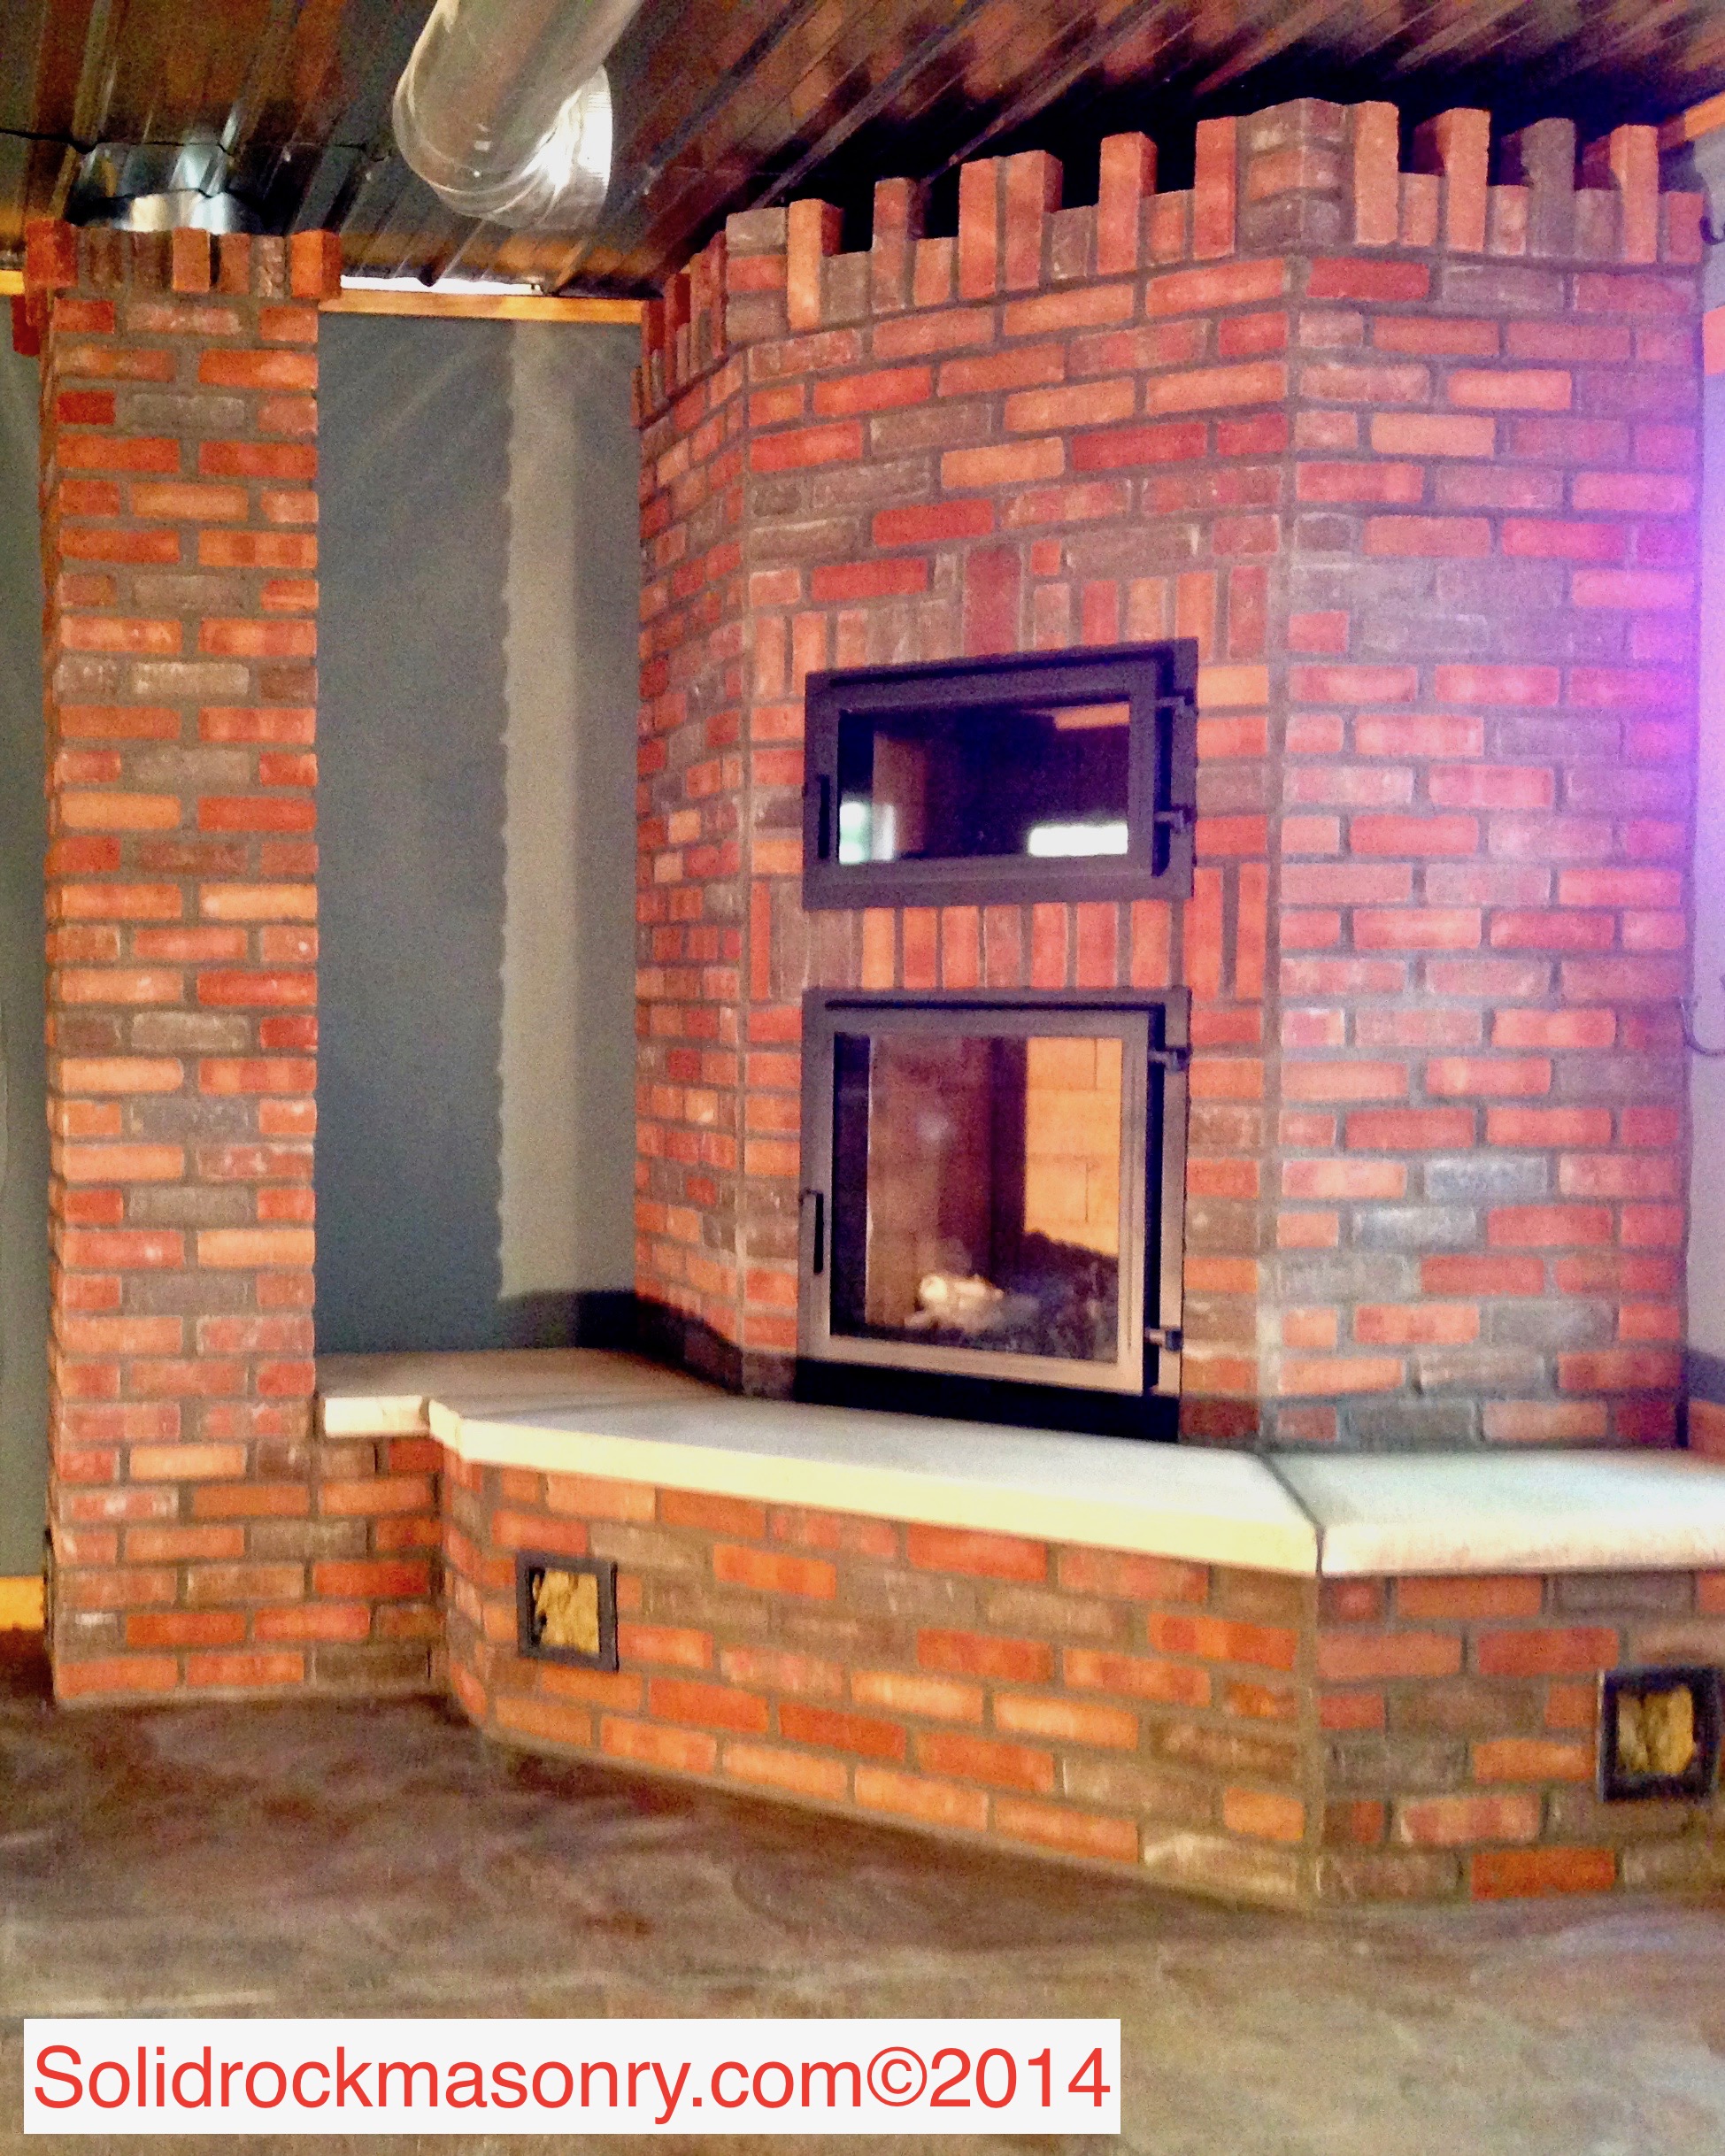 Fearing SR-18 Corner Masonry Heater unit with black oven, hot water loop, & heated bench. Finished in brick and limestone hearth.